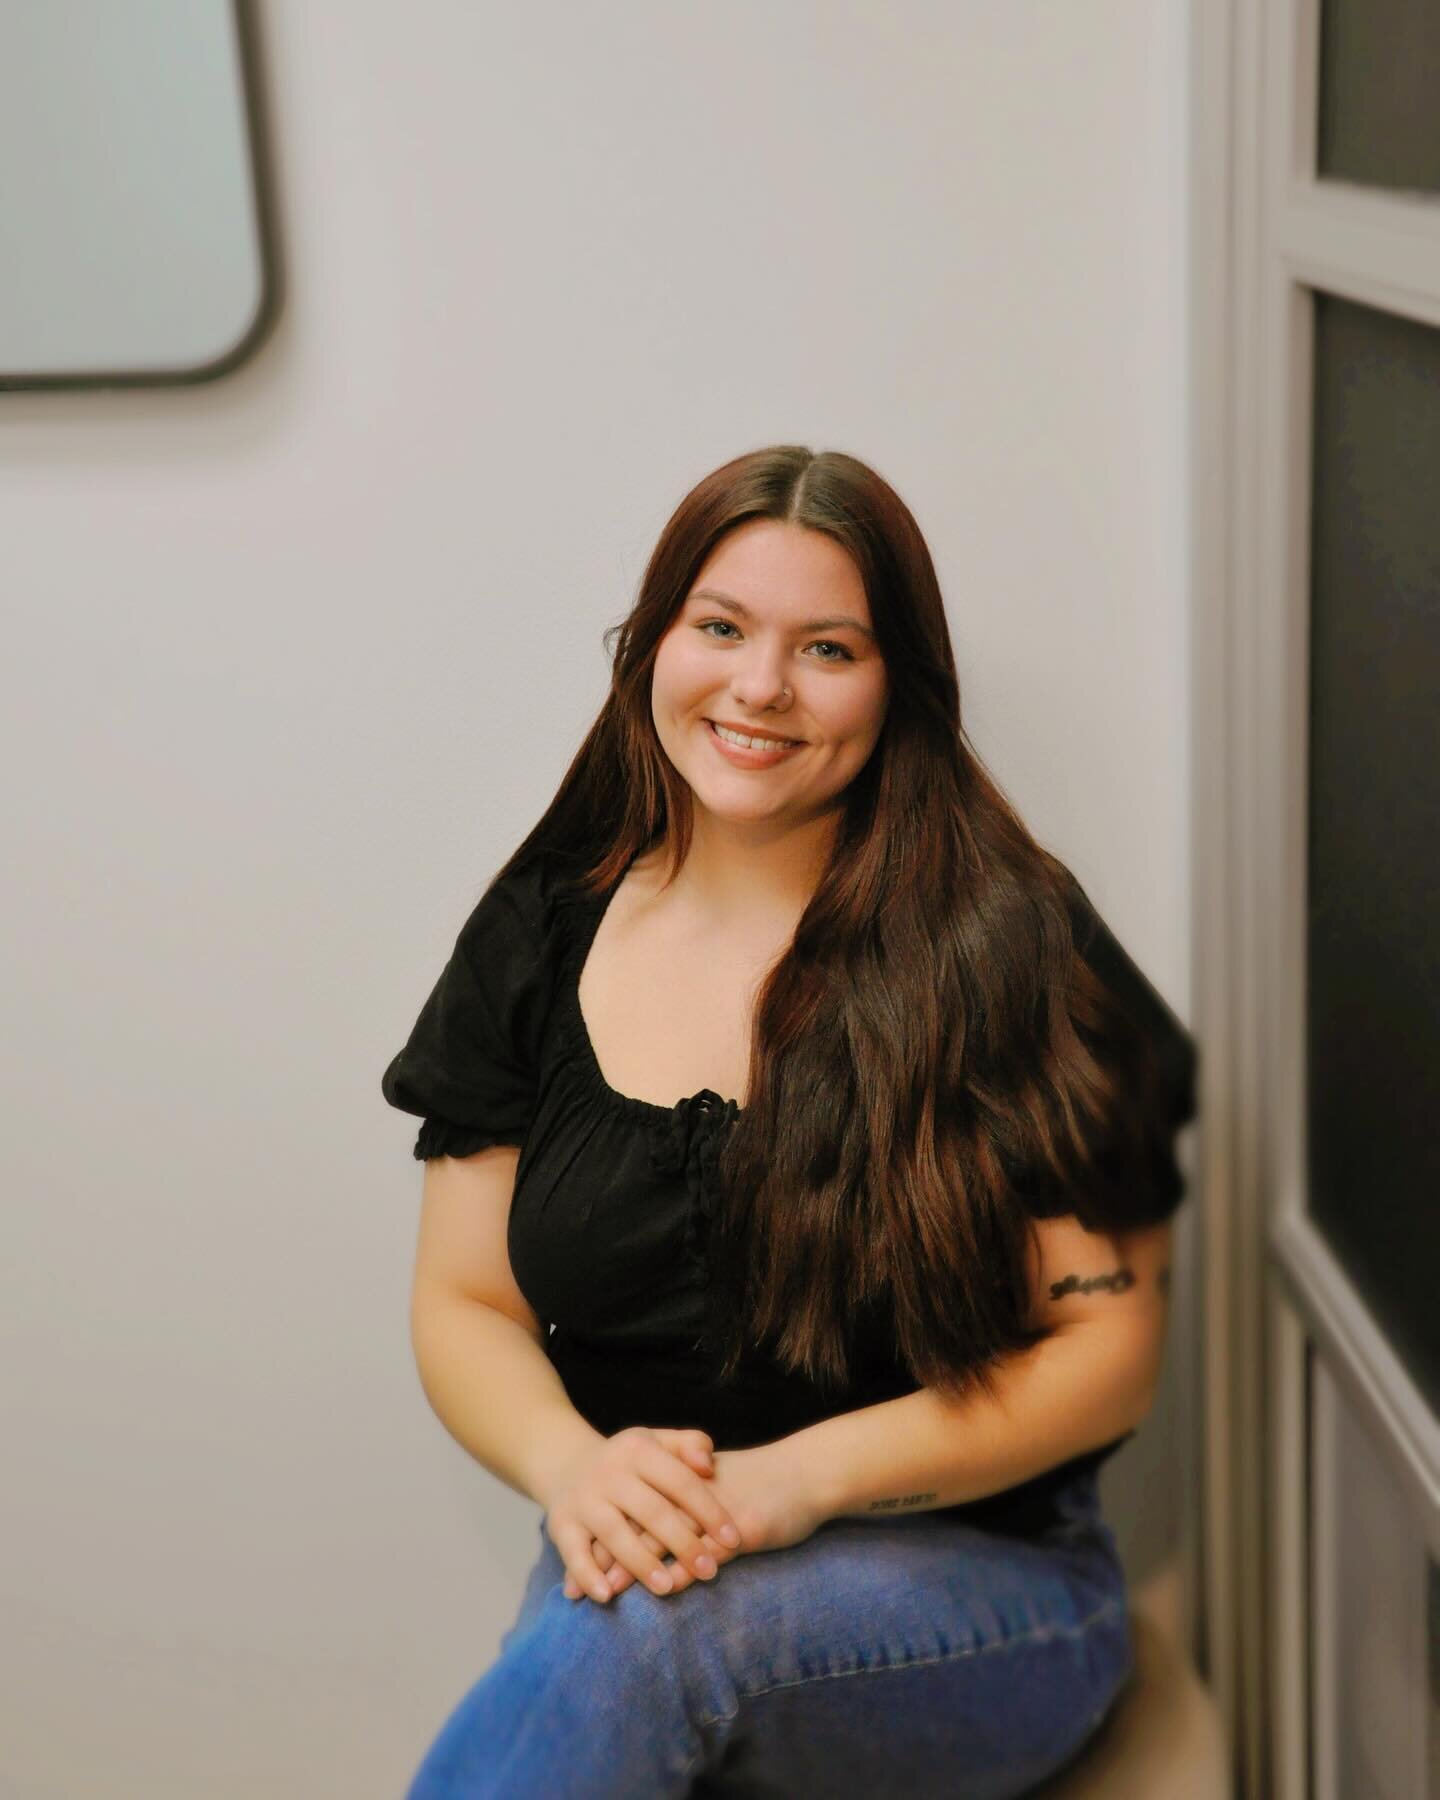 Introducing&hellip; Morgan Boesch 🤍
Desi Esthetics first intern for business logistics &amp; we are so happy to have her! Morgan is a student at PFW majoring in Communications &amp; Women&rsquo;s Studies. If you see Morgan around the spa- give her a